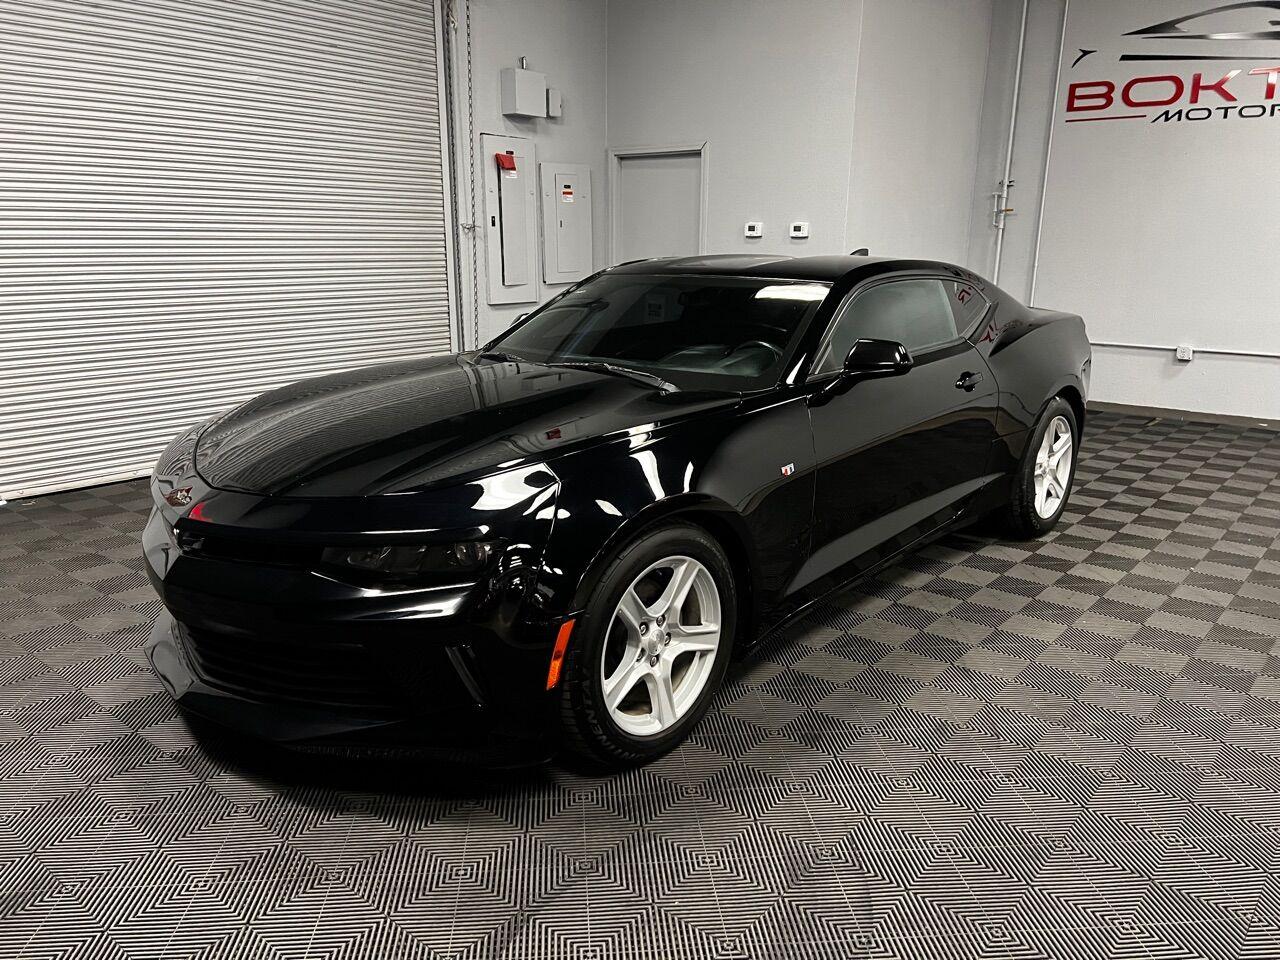 Used 2016 Chevrolet Camaro LT 2dr Coupe w/1LT For Sale (Sold 